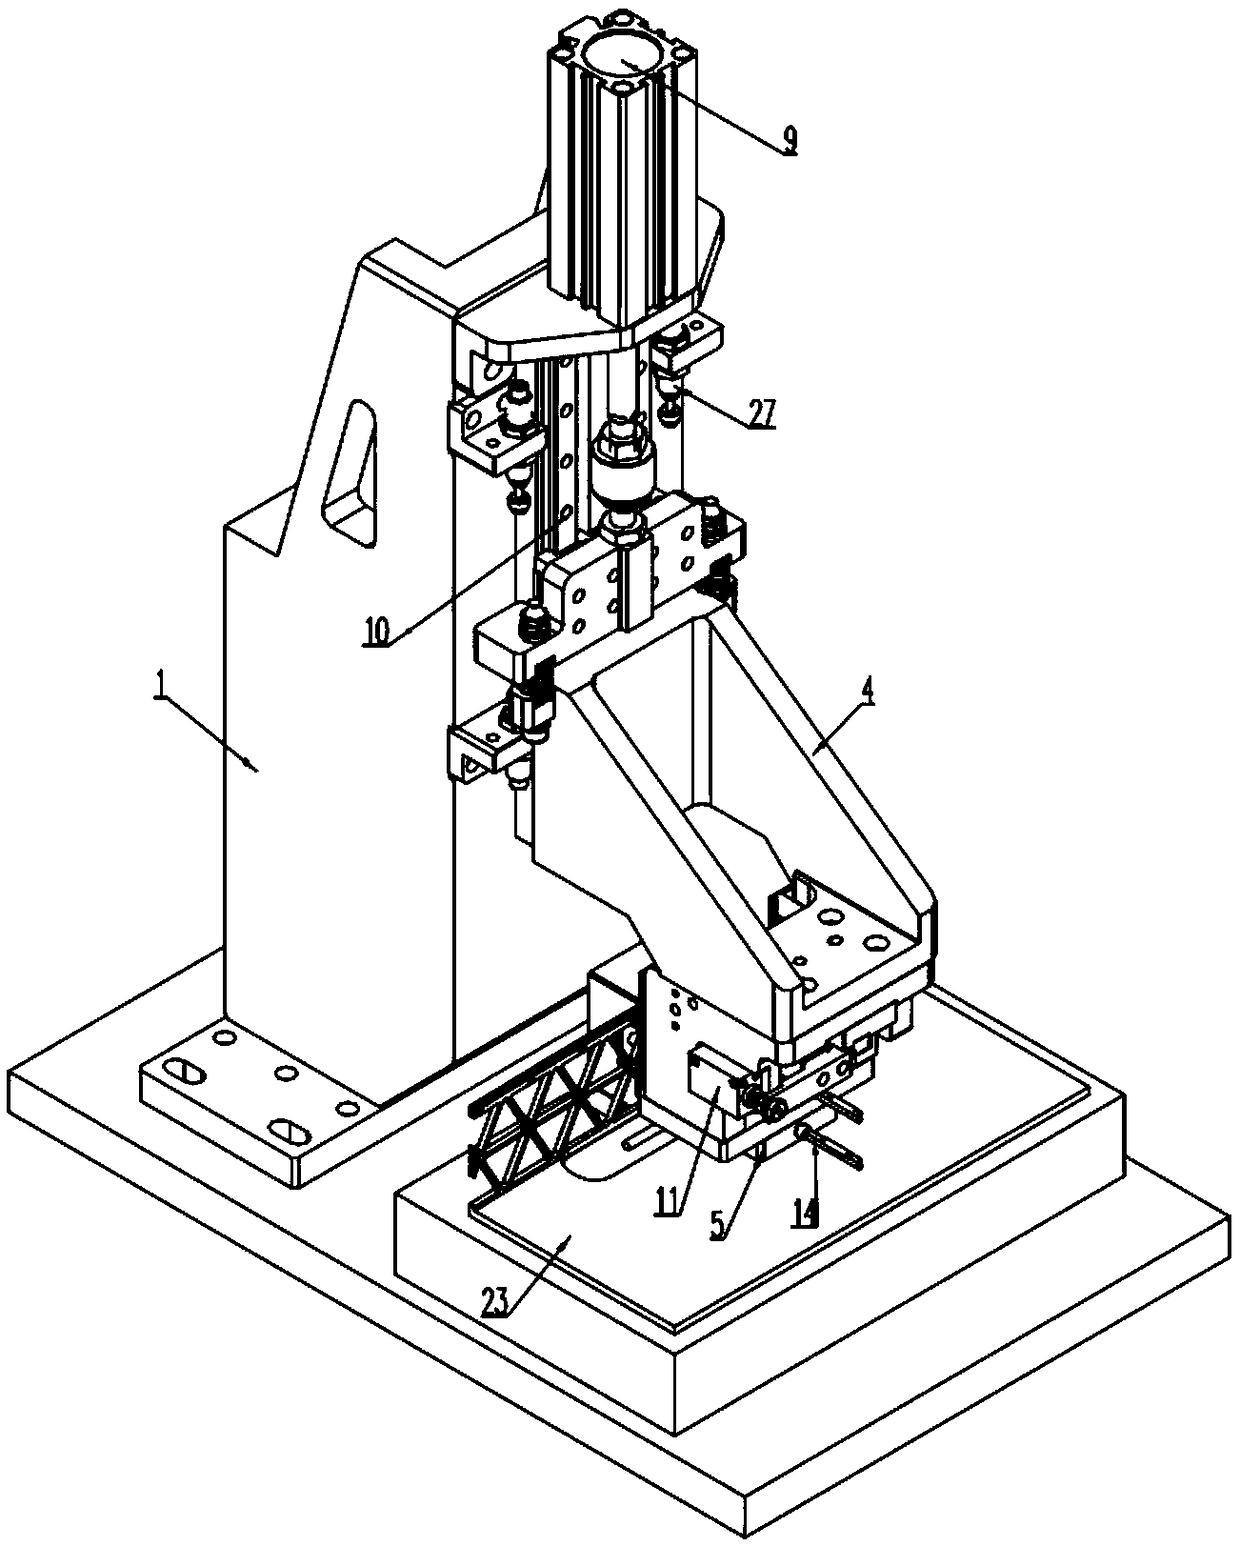 Mechanism used for maintaining pressure of L-shaped part